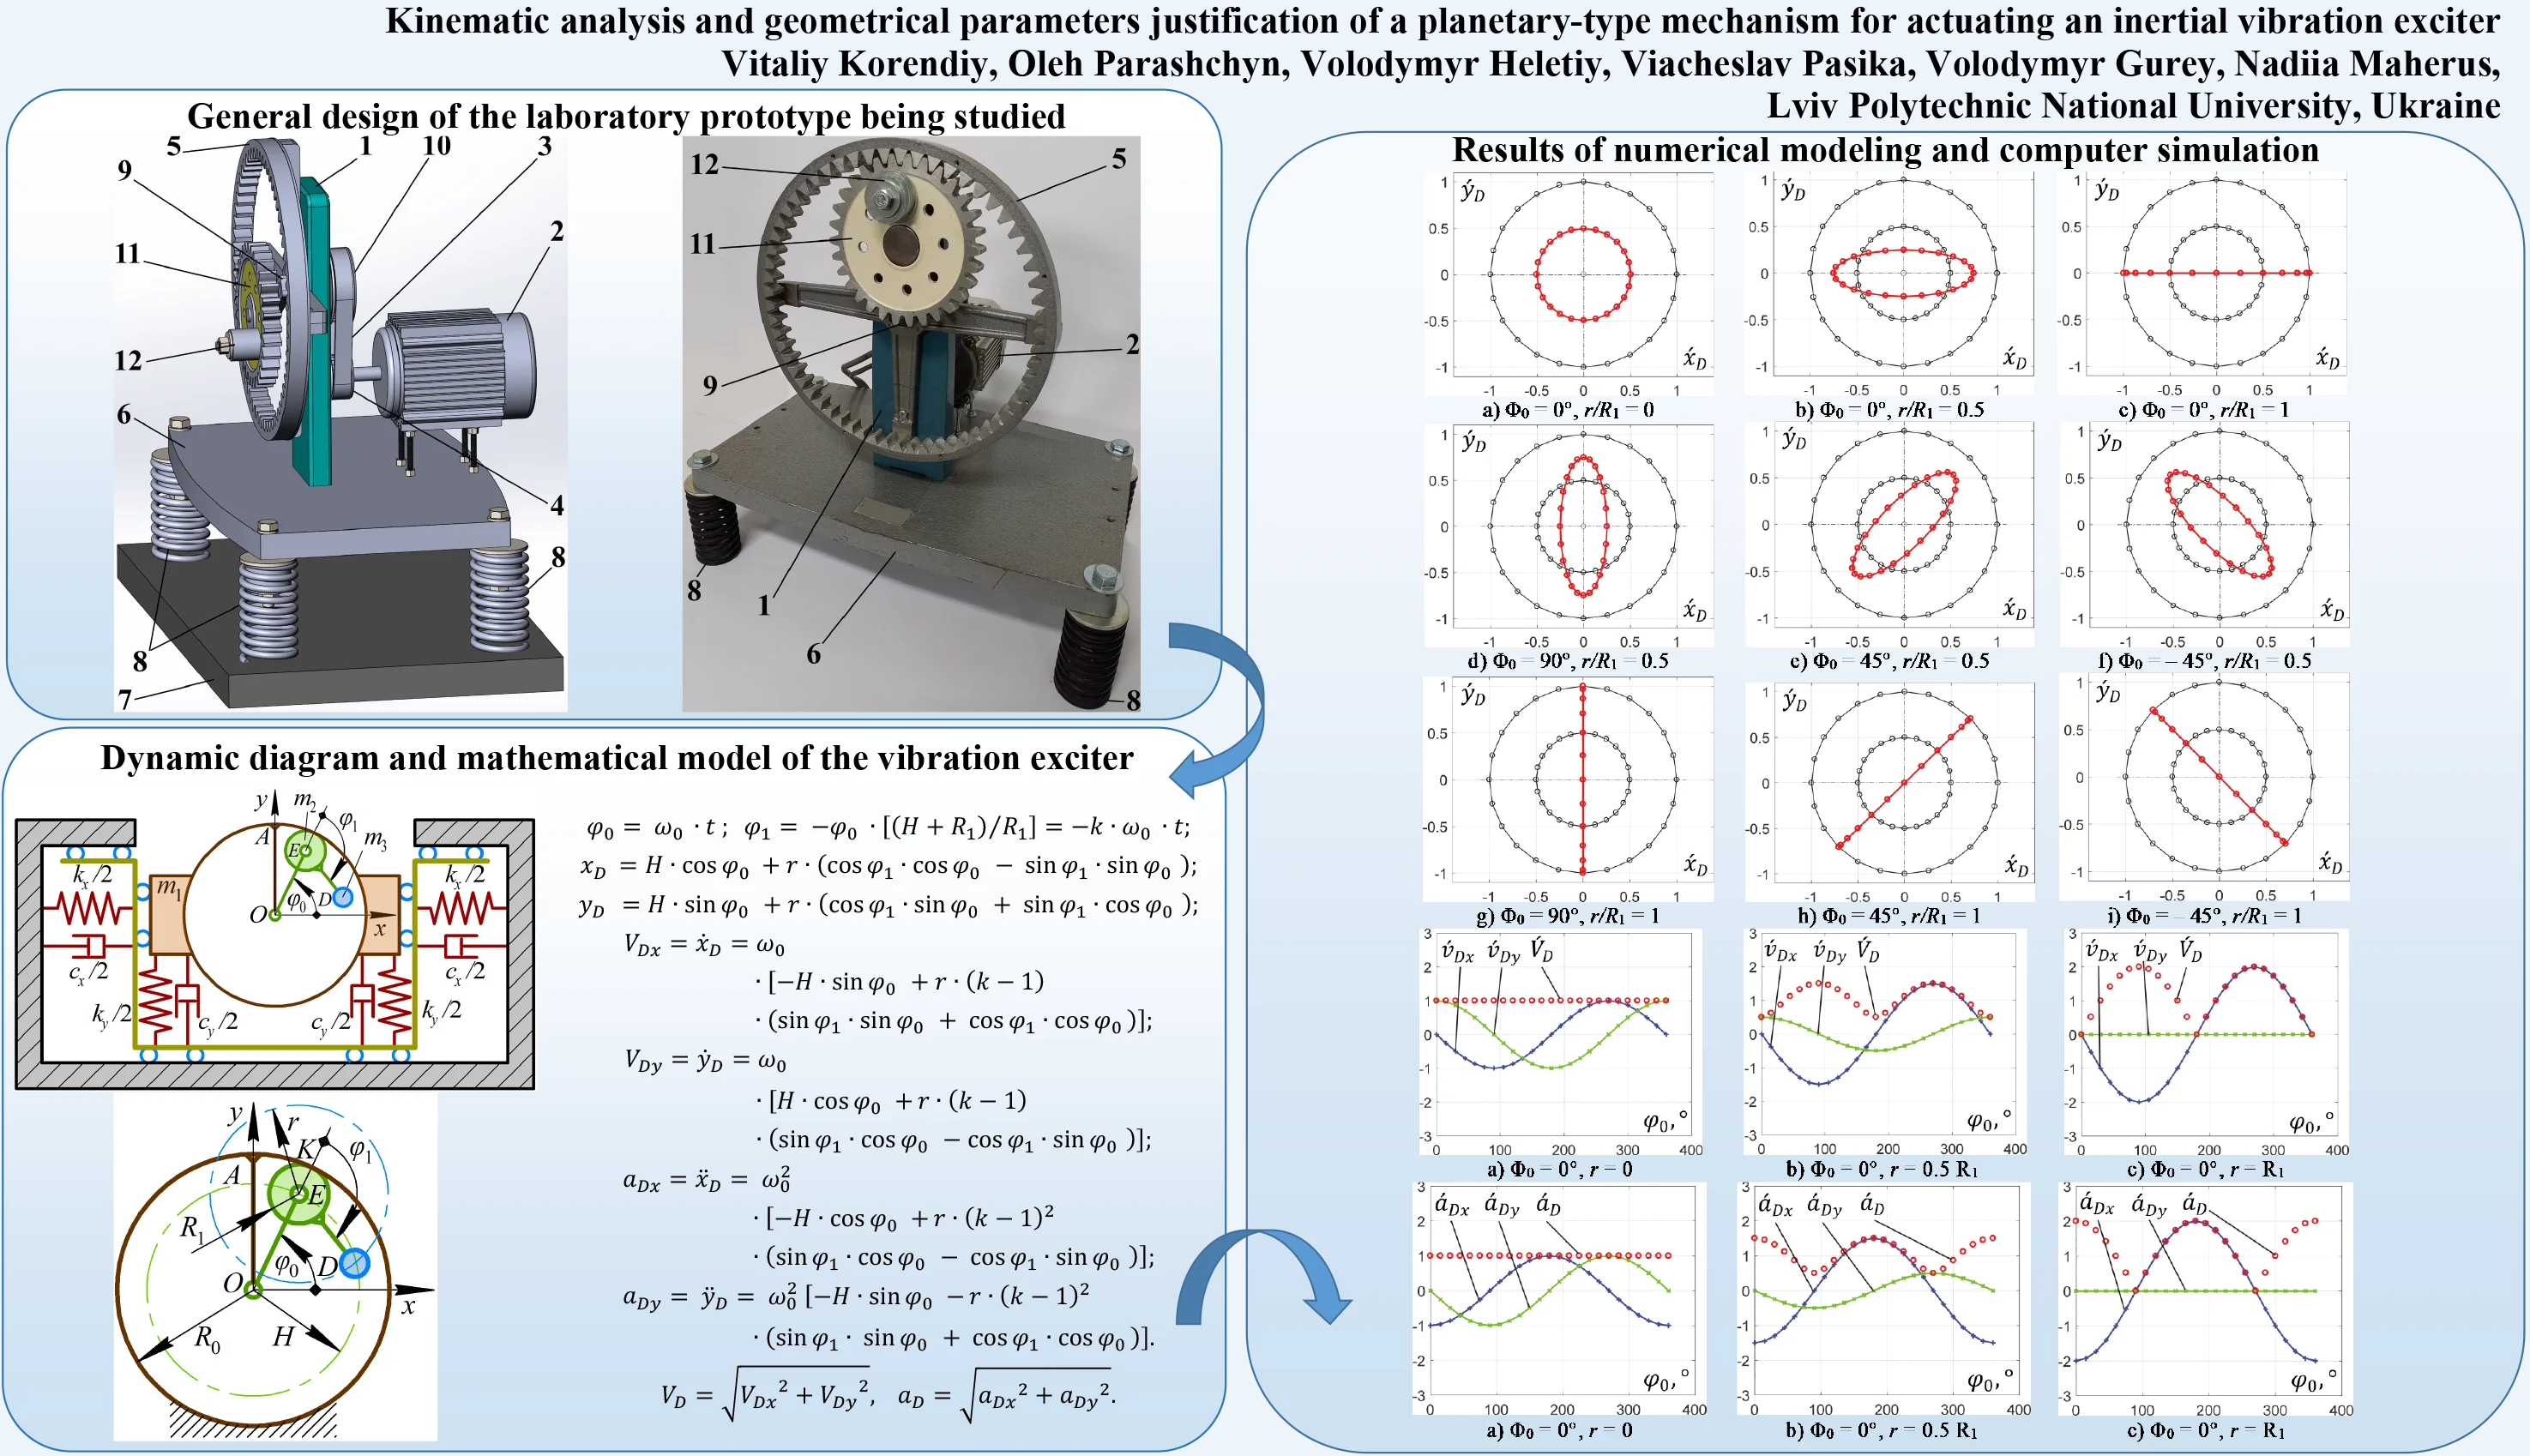 Kinematic analysis and geometrical parameters justification of a planetary-type mechanism for actuating an inertial vibration exciter